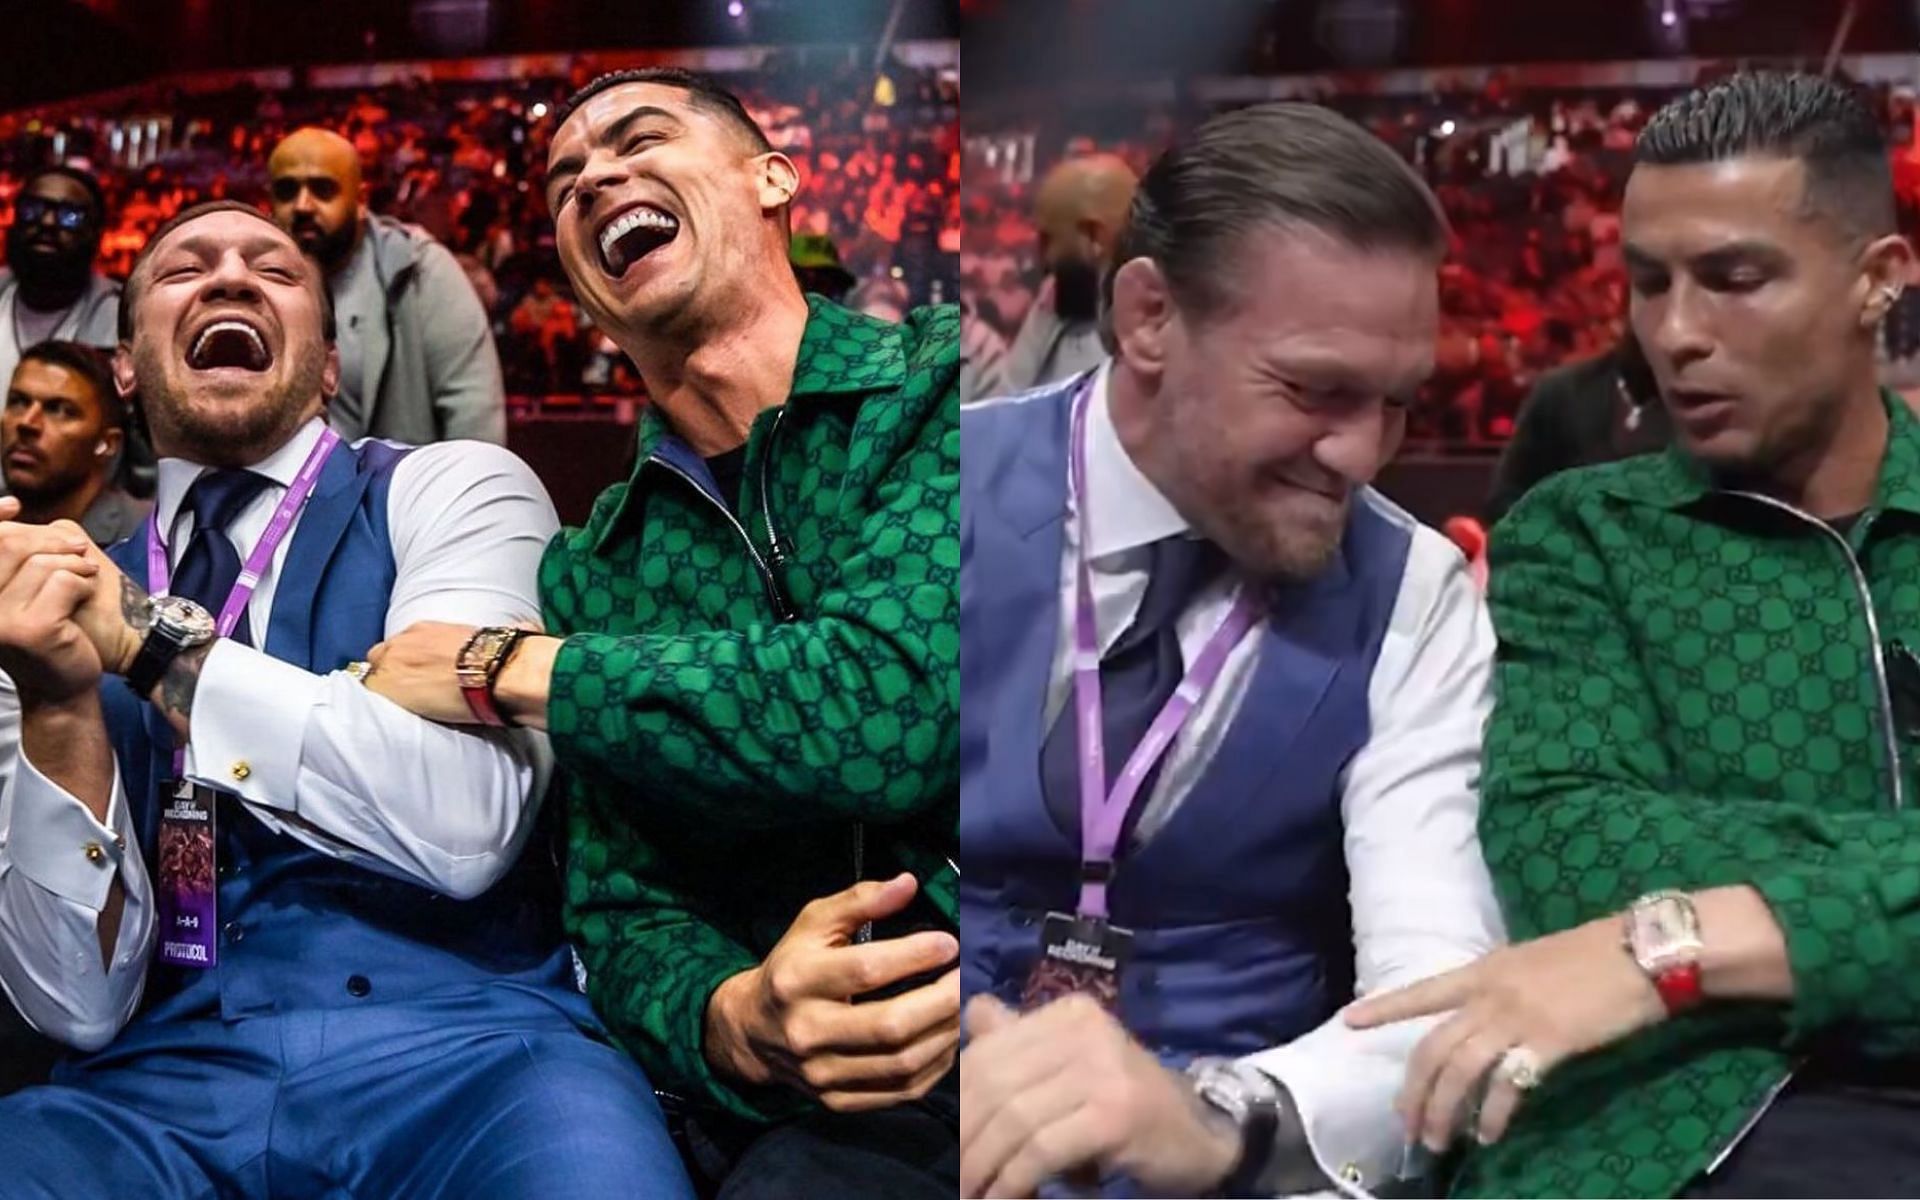 Conor McGregor and Cristiano Ronaldo comparing their watches (Images courtesy @cristiano on Instagram and @SandhuMMA on X)